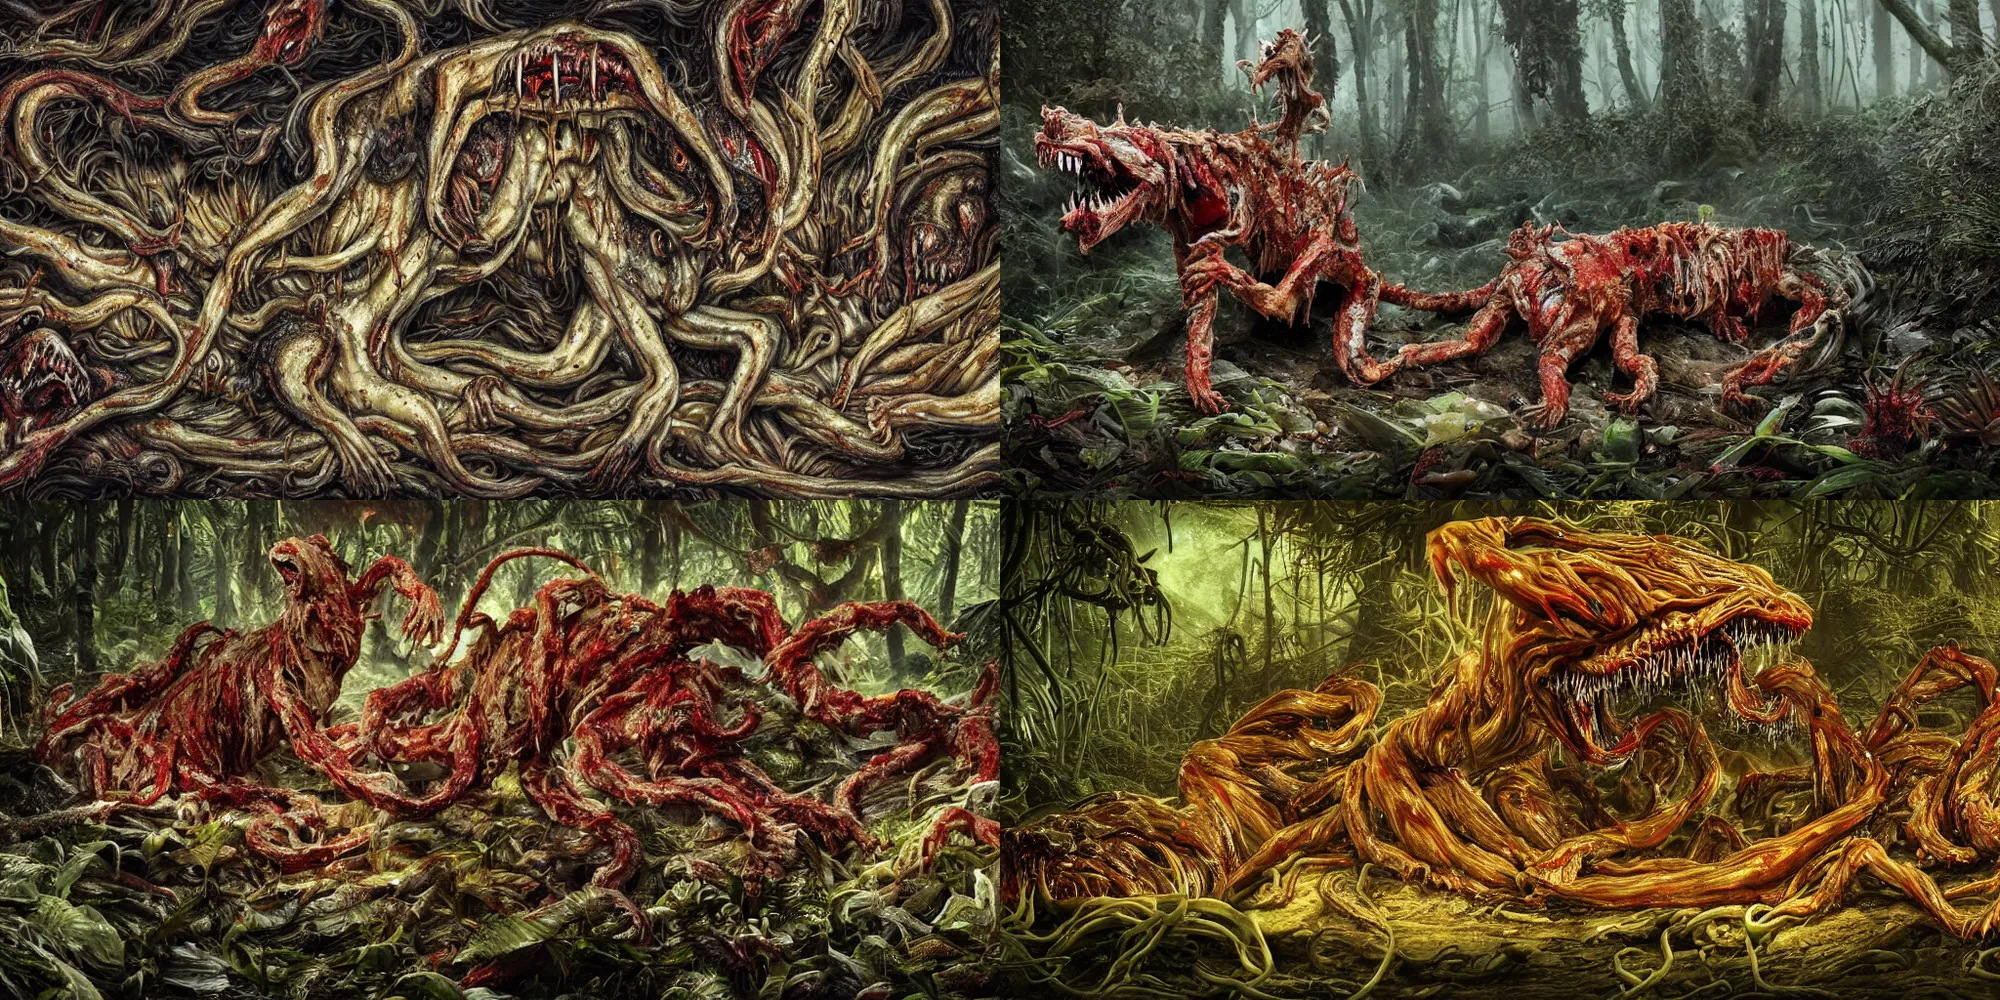 Prompt: an ultra-detailed high-quality photo of twisted animals and hostile tubifex worms melting together, forming a livid amorphous mass of blood-oozing body horror of epic proportions composed of random limbs, jaws full of sharp teeth, patches of fur, glowing eyes, and intestines falling out and slithering, in a deep lush jungle at night, hazy atmosphere